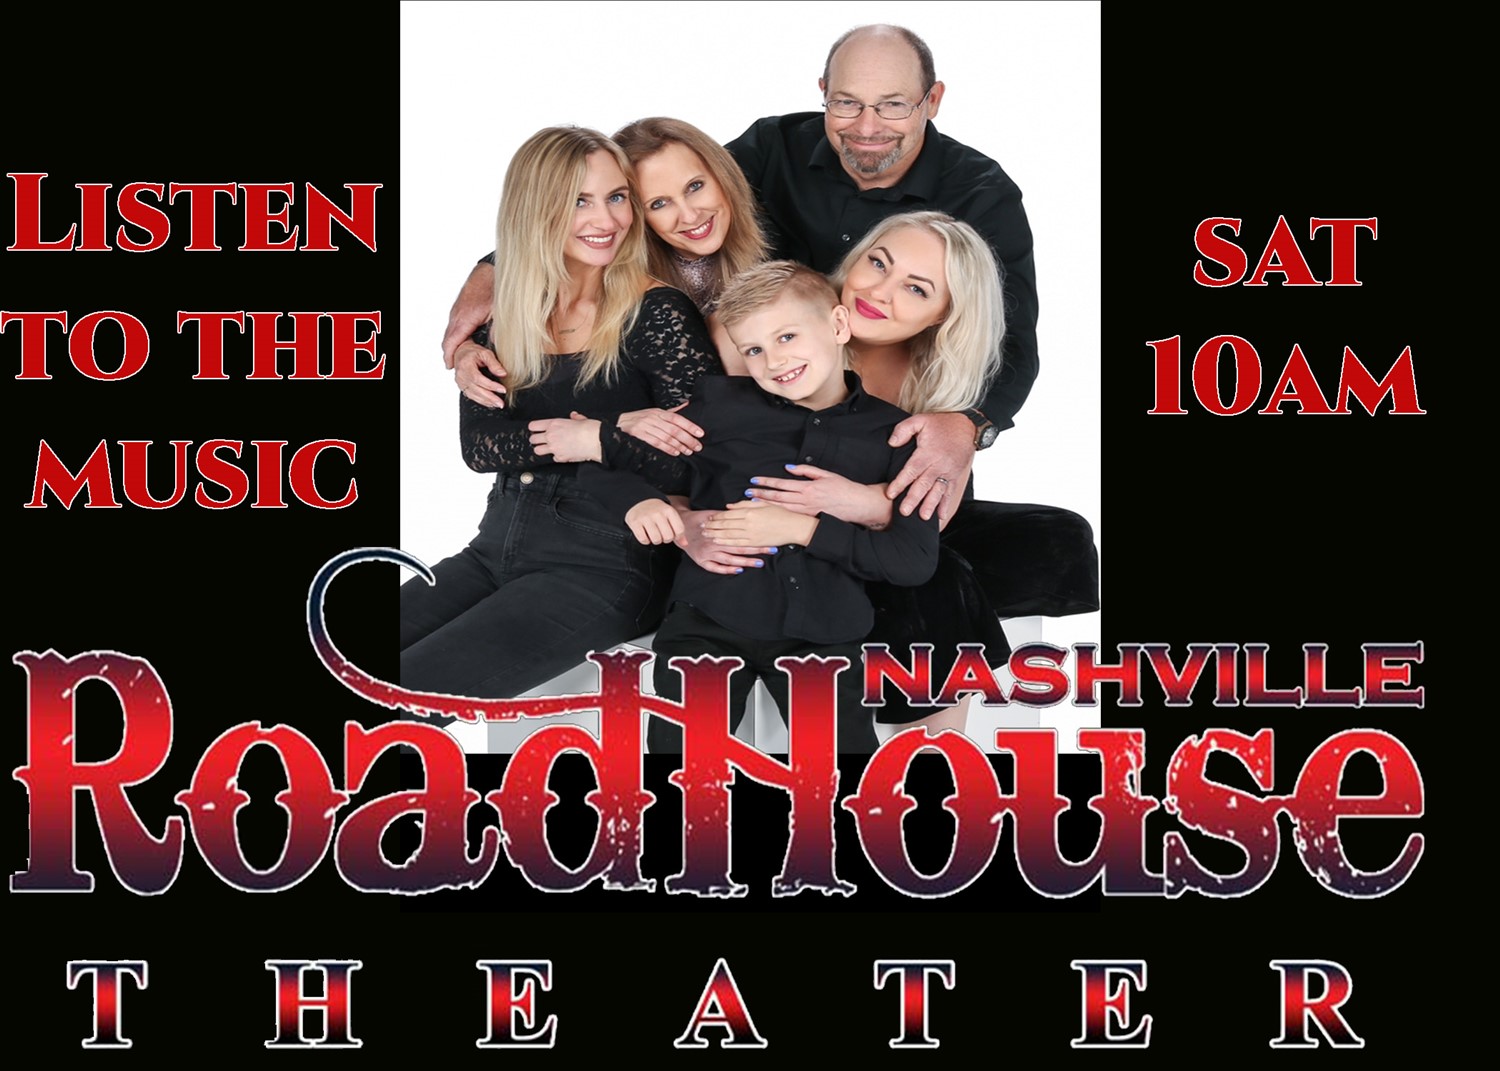 Listen To The Music  on Dec 19, 00:00@Nasvhille Roadhouse Theater at the Branson Star - Pick a seat, Buy tickets and Get information on nashvilleroadhouse.com bransonstartheater